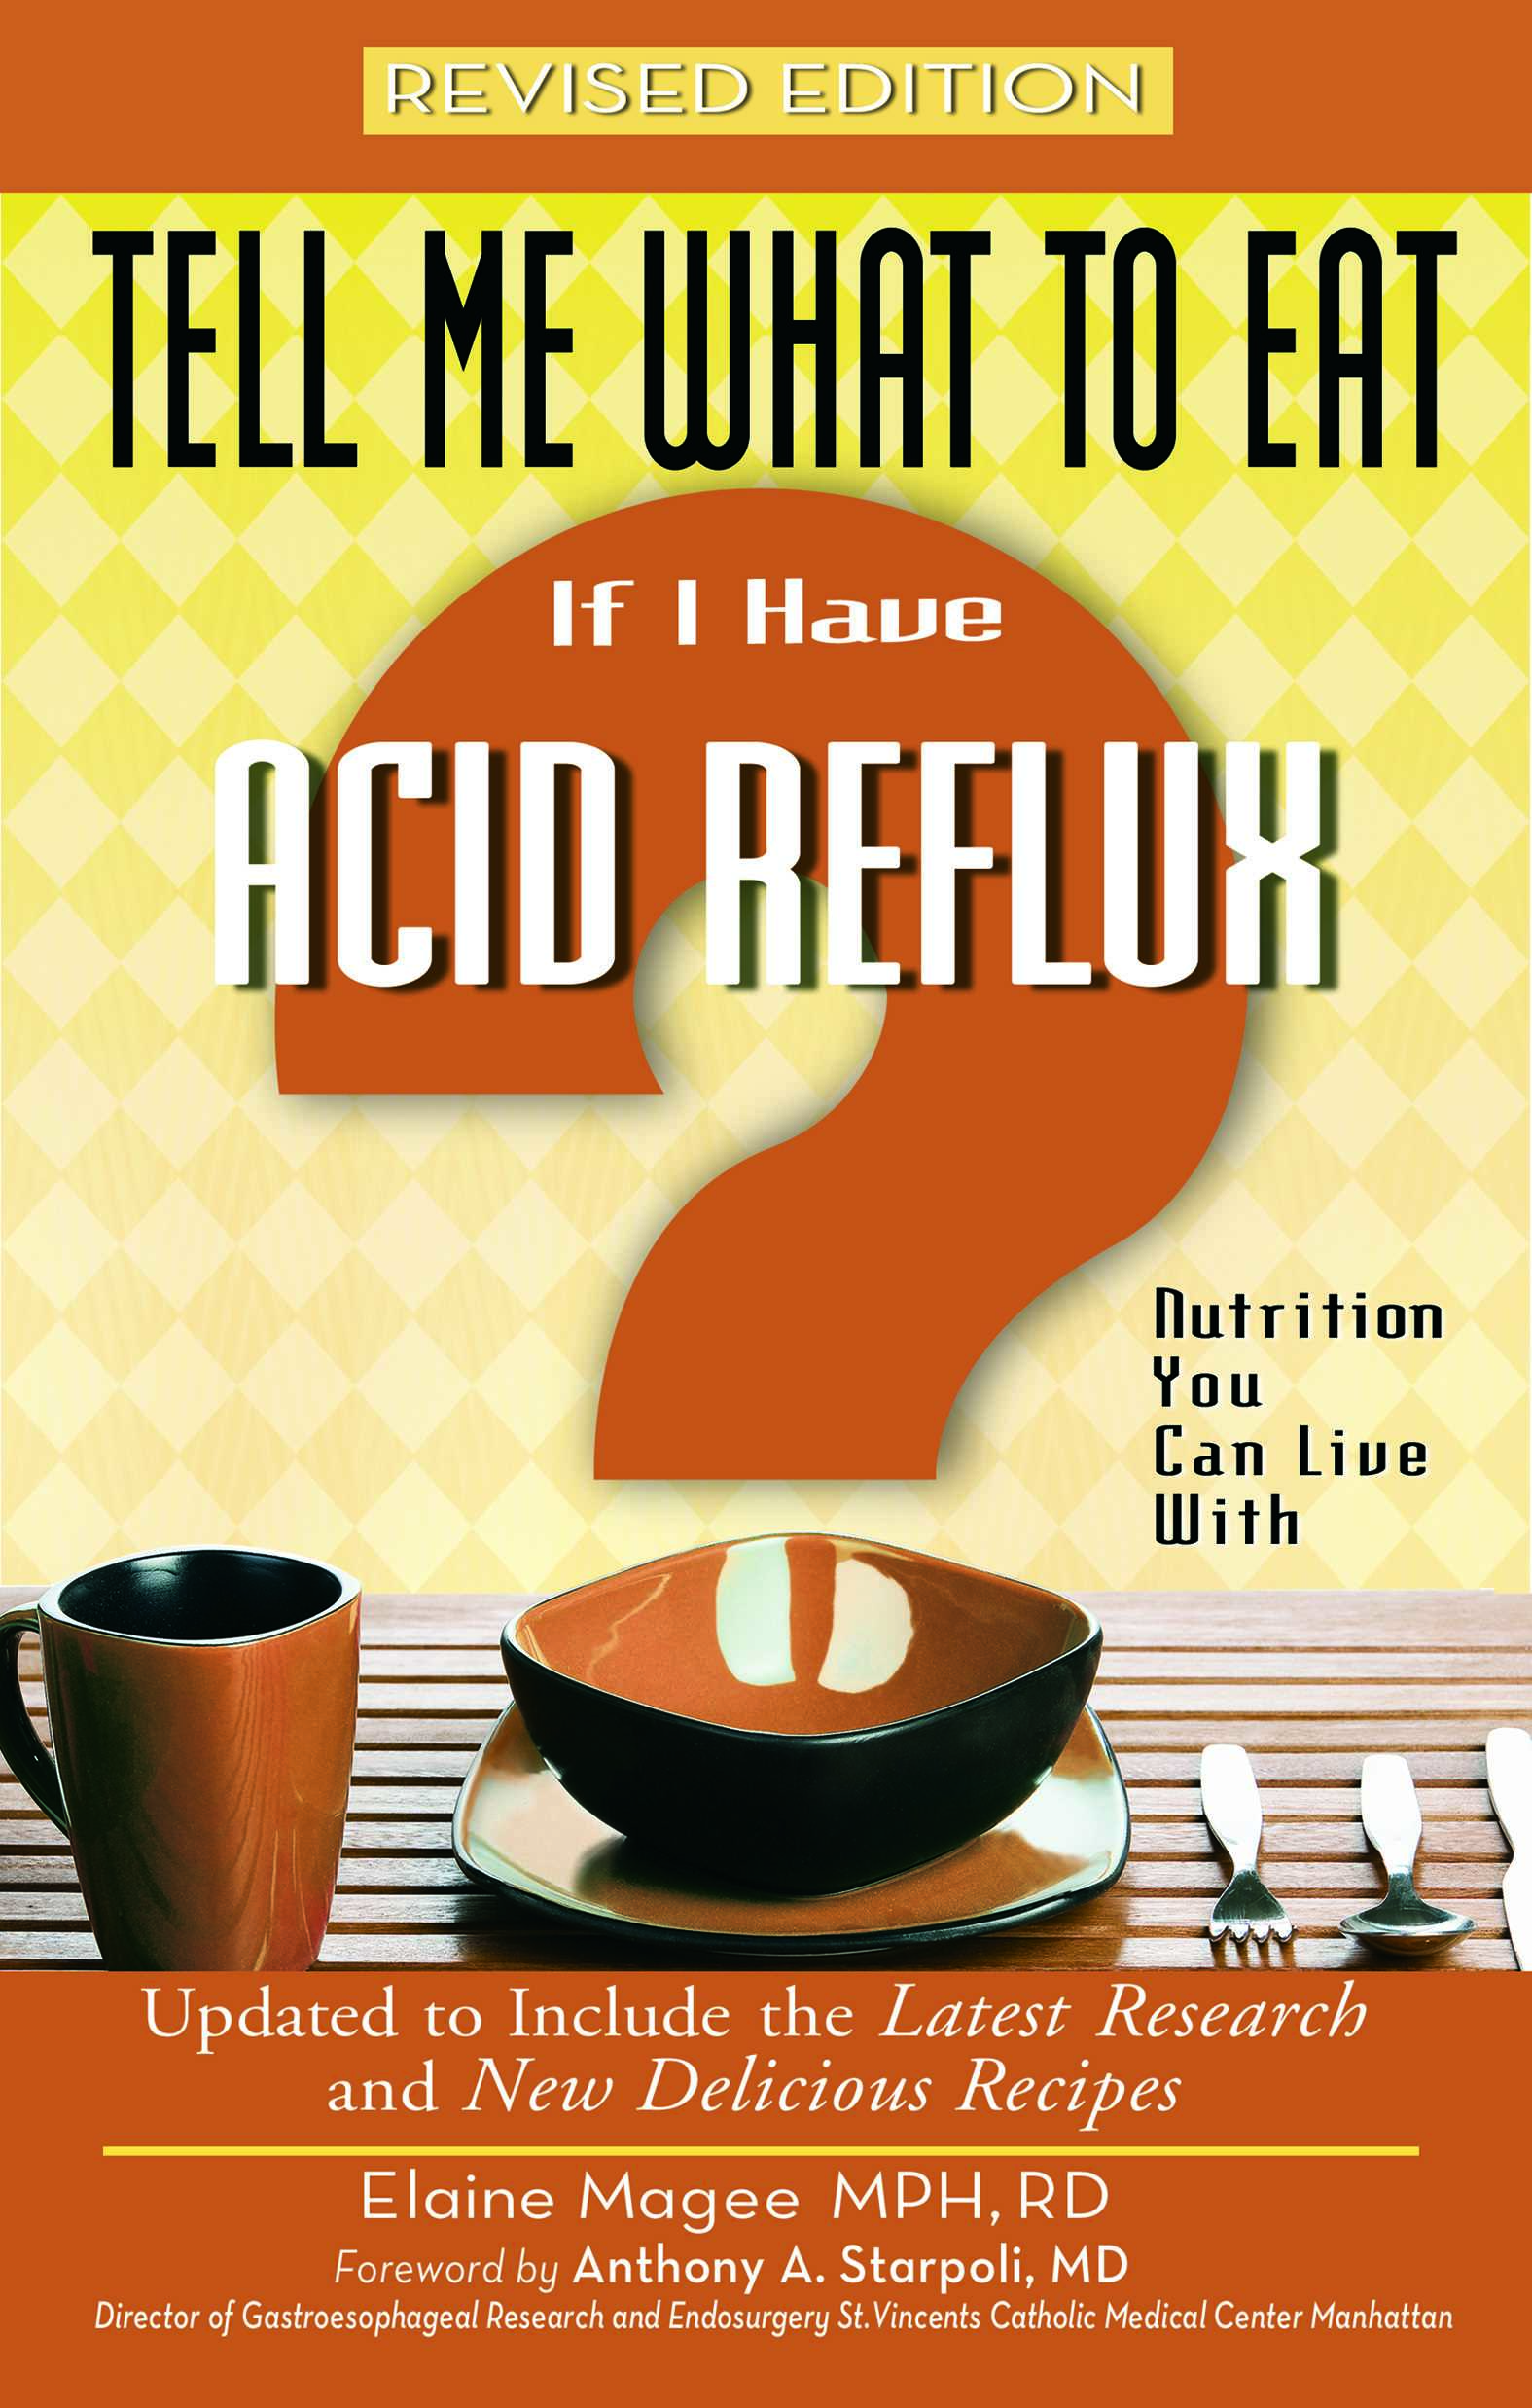 Tell Me What to Eat if I Have Acid Reflux (Revised Edition)